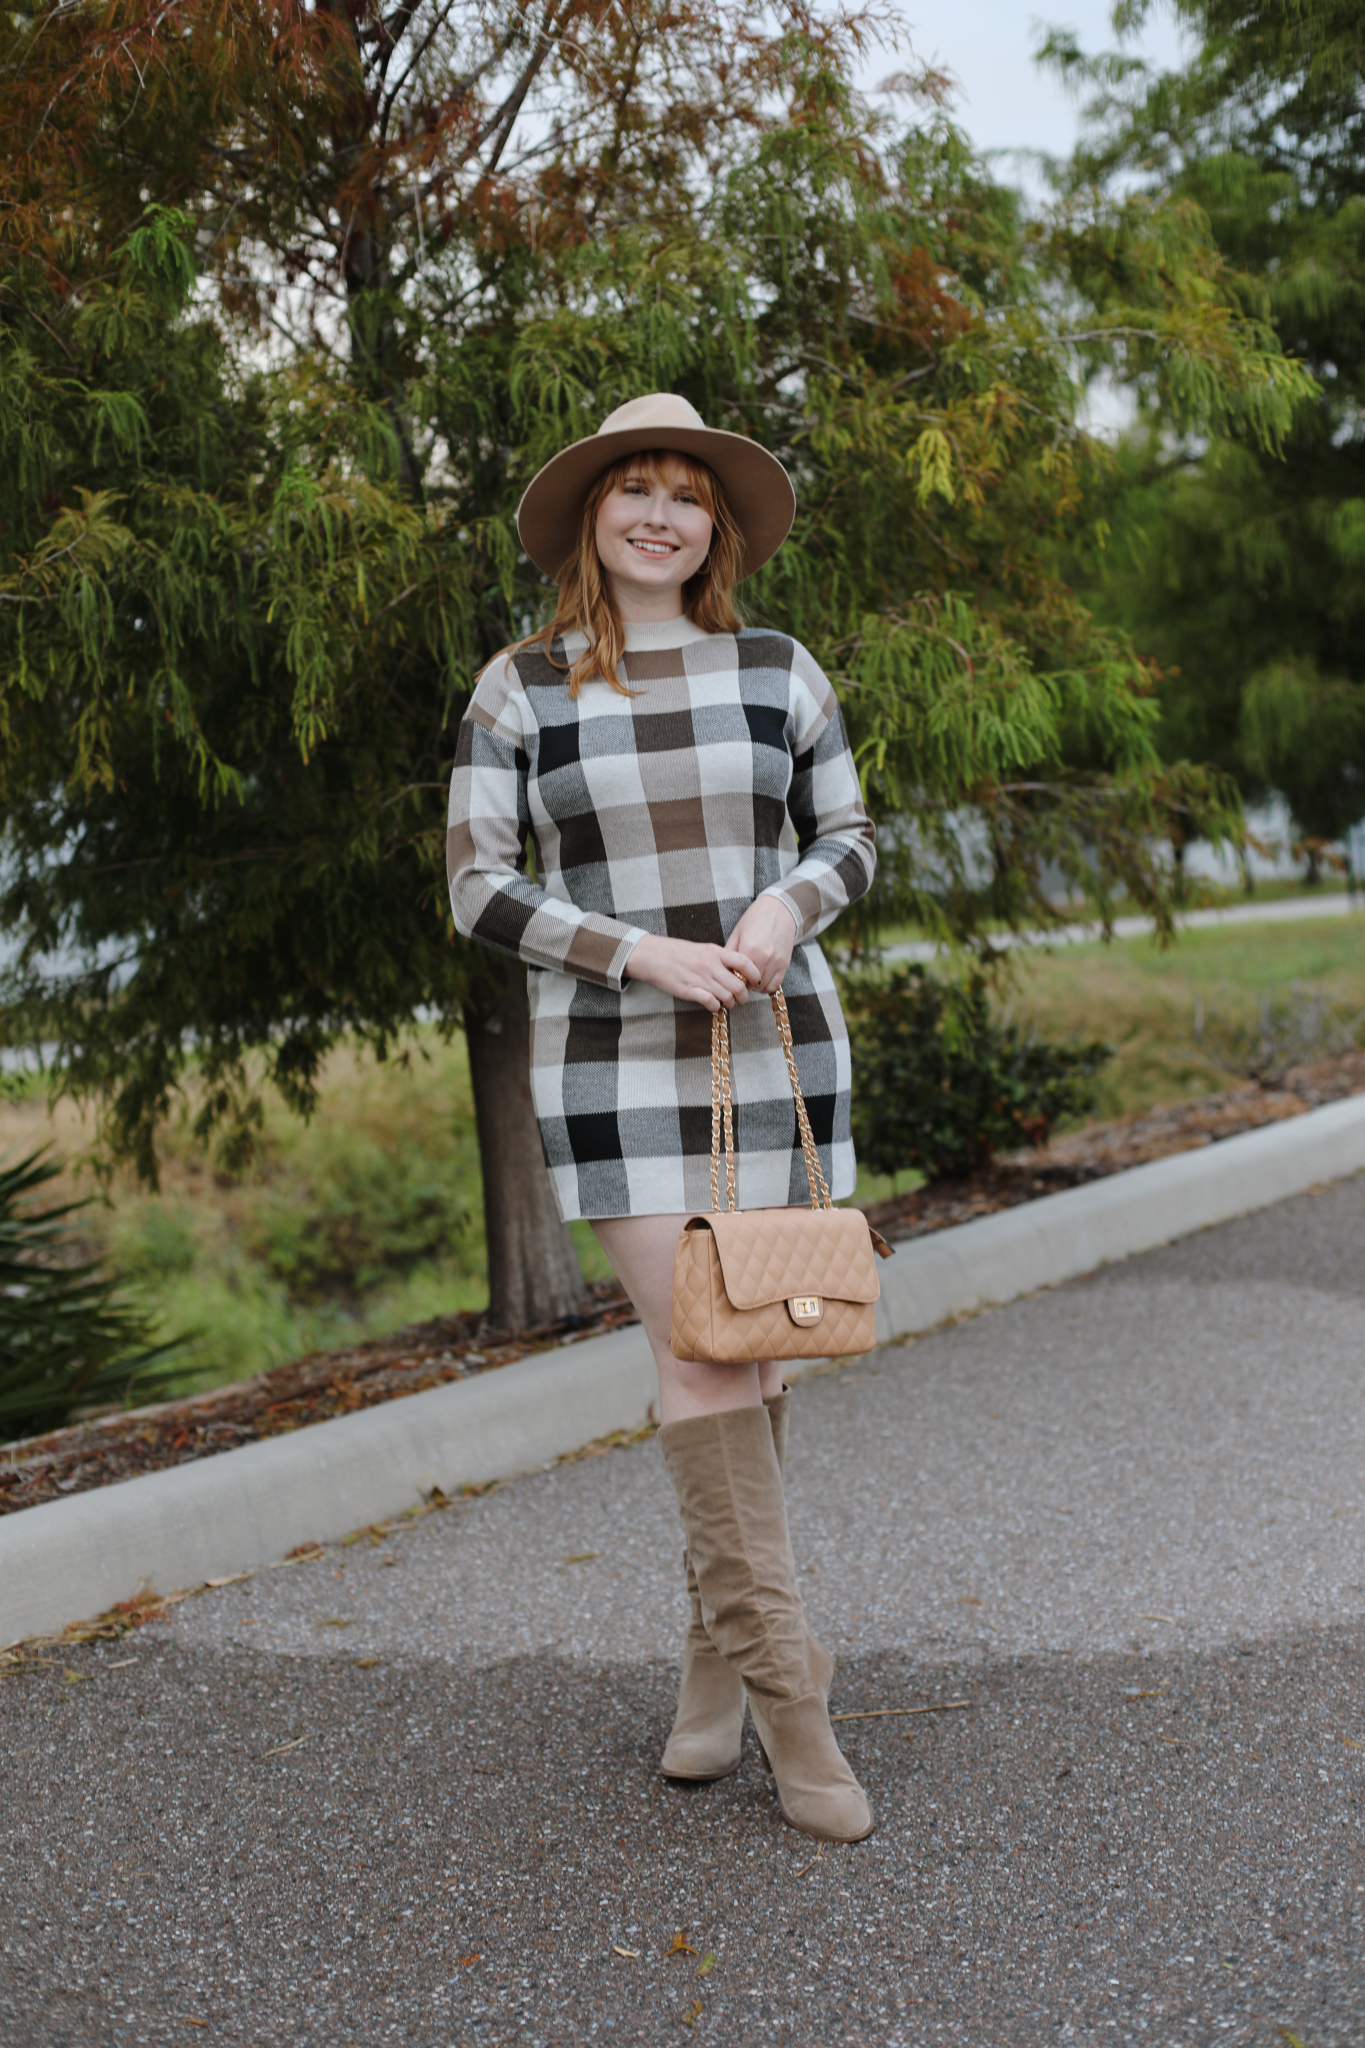 20 Stylish Fall Outfit Ideas  Fall & Autumn Outfit Inspiration